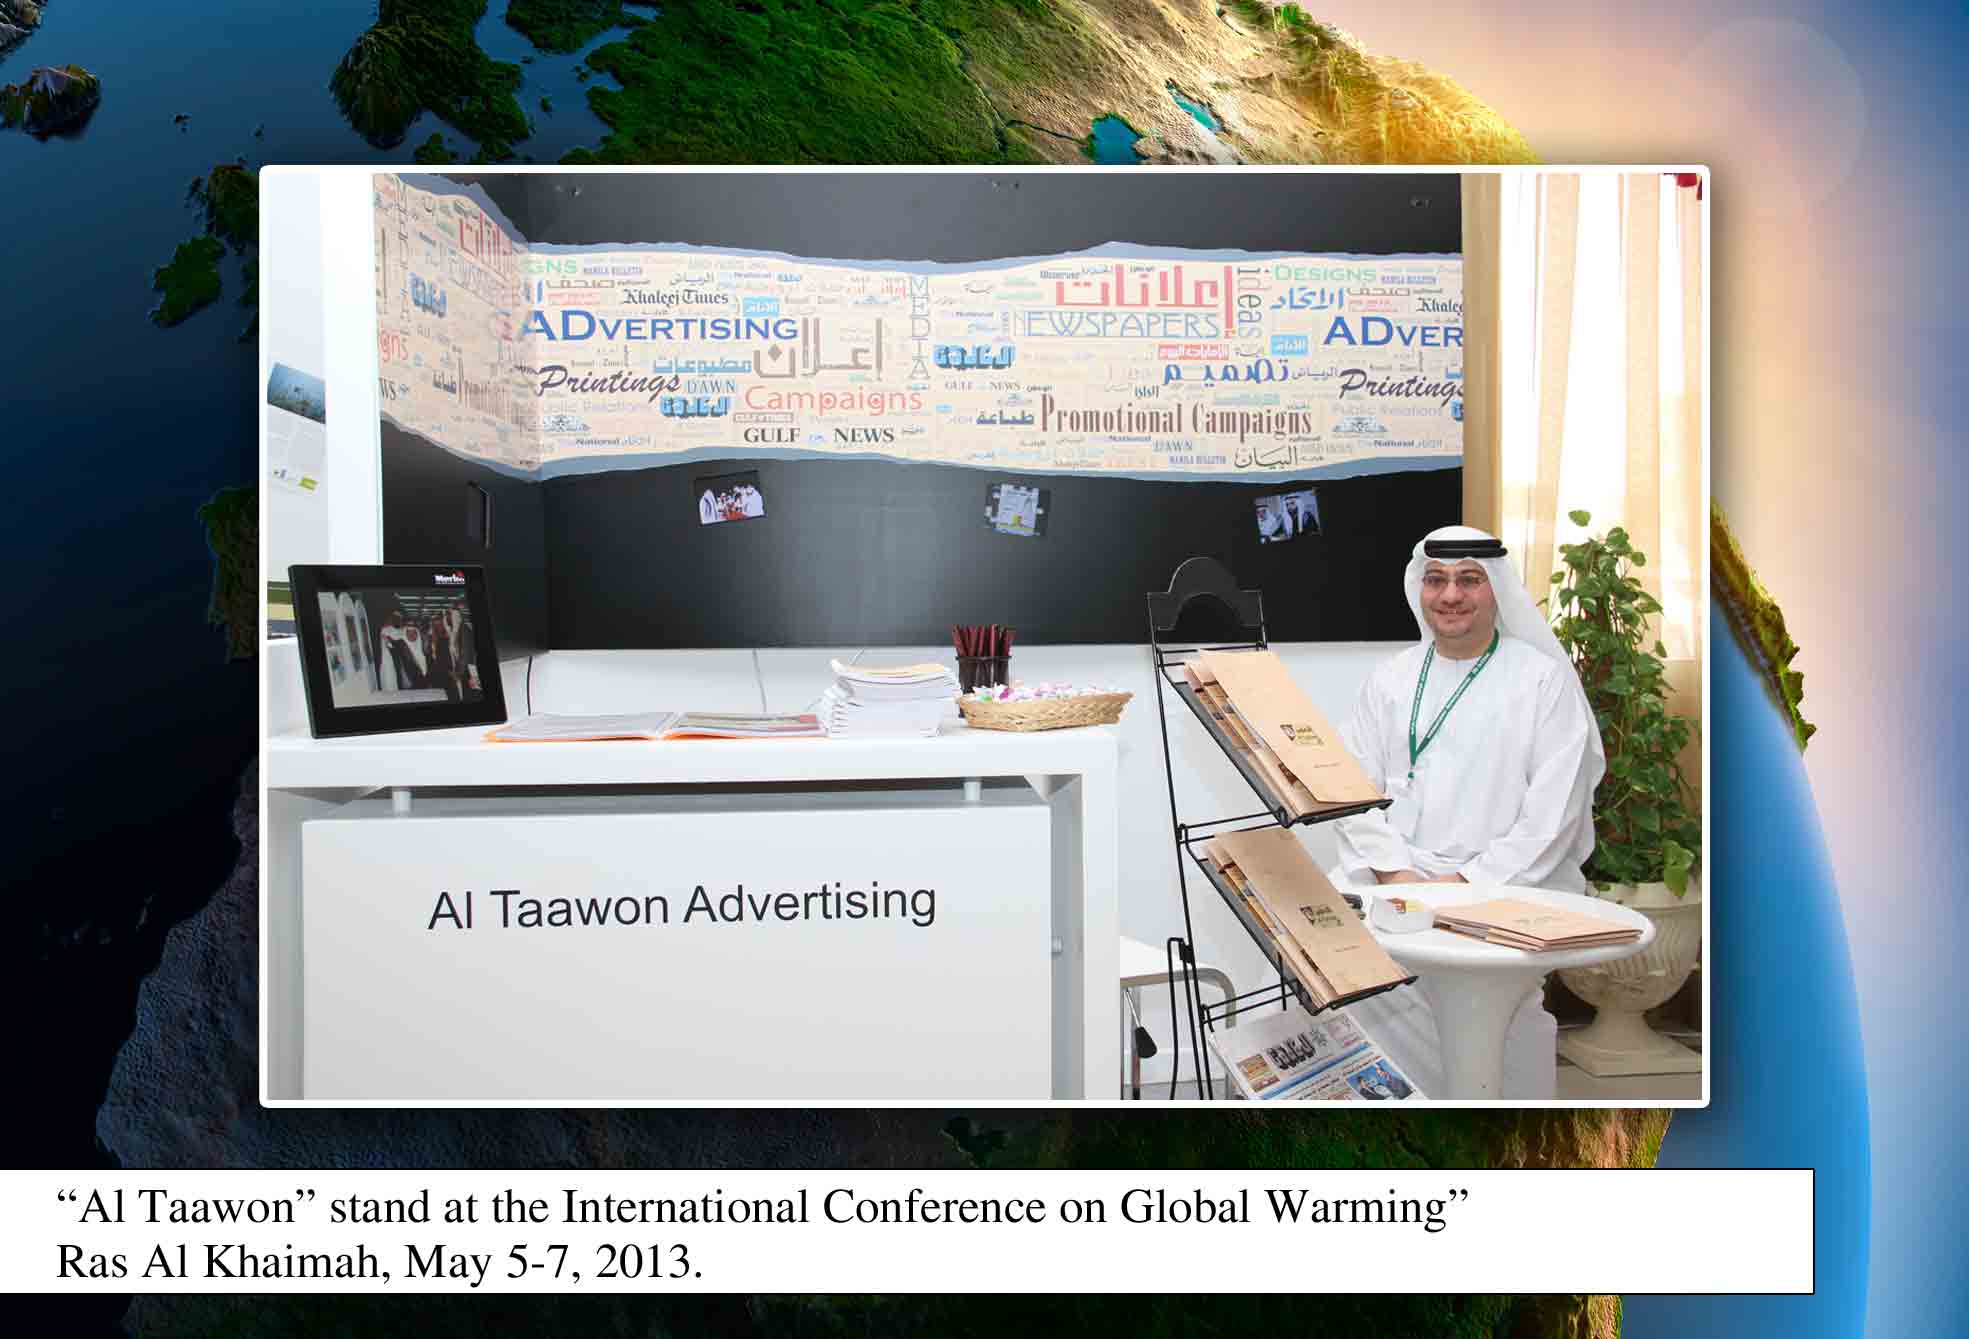  Al Taawon Stand in Global Warming Conference